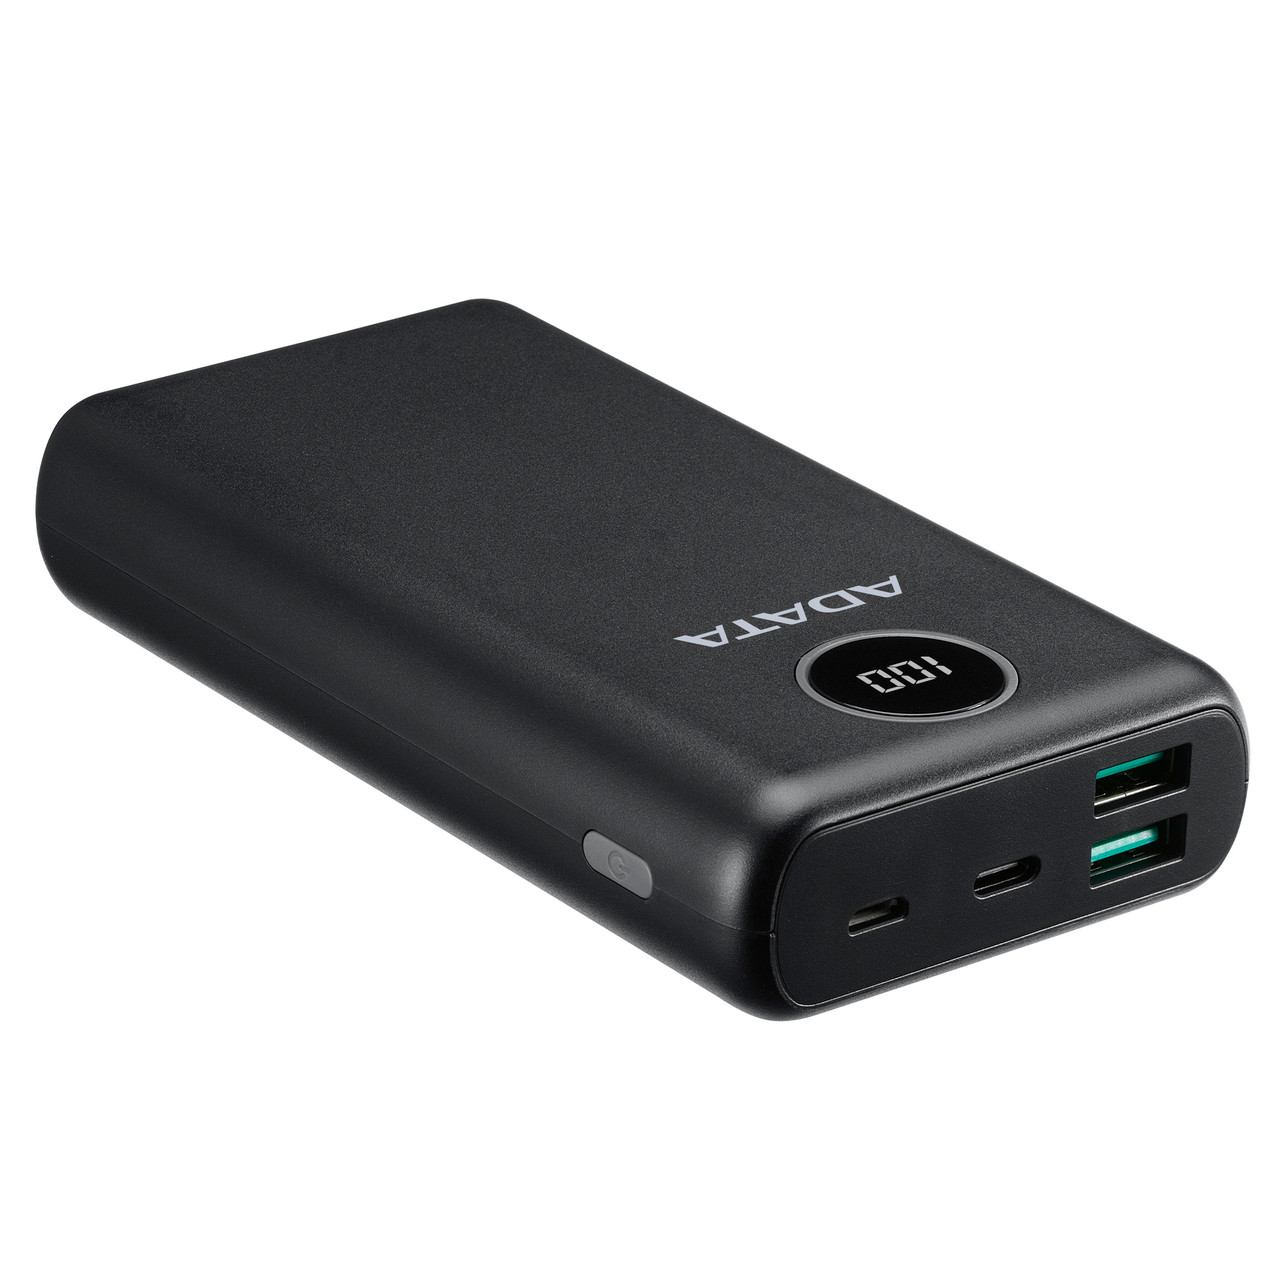 Adata Pbc20-Bk C20 Black Powerbank 20000mah , Micro-Usb + Type-C Dual Input ( 5v/3a Or 5v/2a ) For Fast Charging + Triple Output ( 2x Usb Type-A @5v/2.4a + 1x Usb3 Type-C @ 5v/3a ) , For Apple Idevice + Other Mobile Devices , 140x69x28mm , 418g – With Ovp